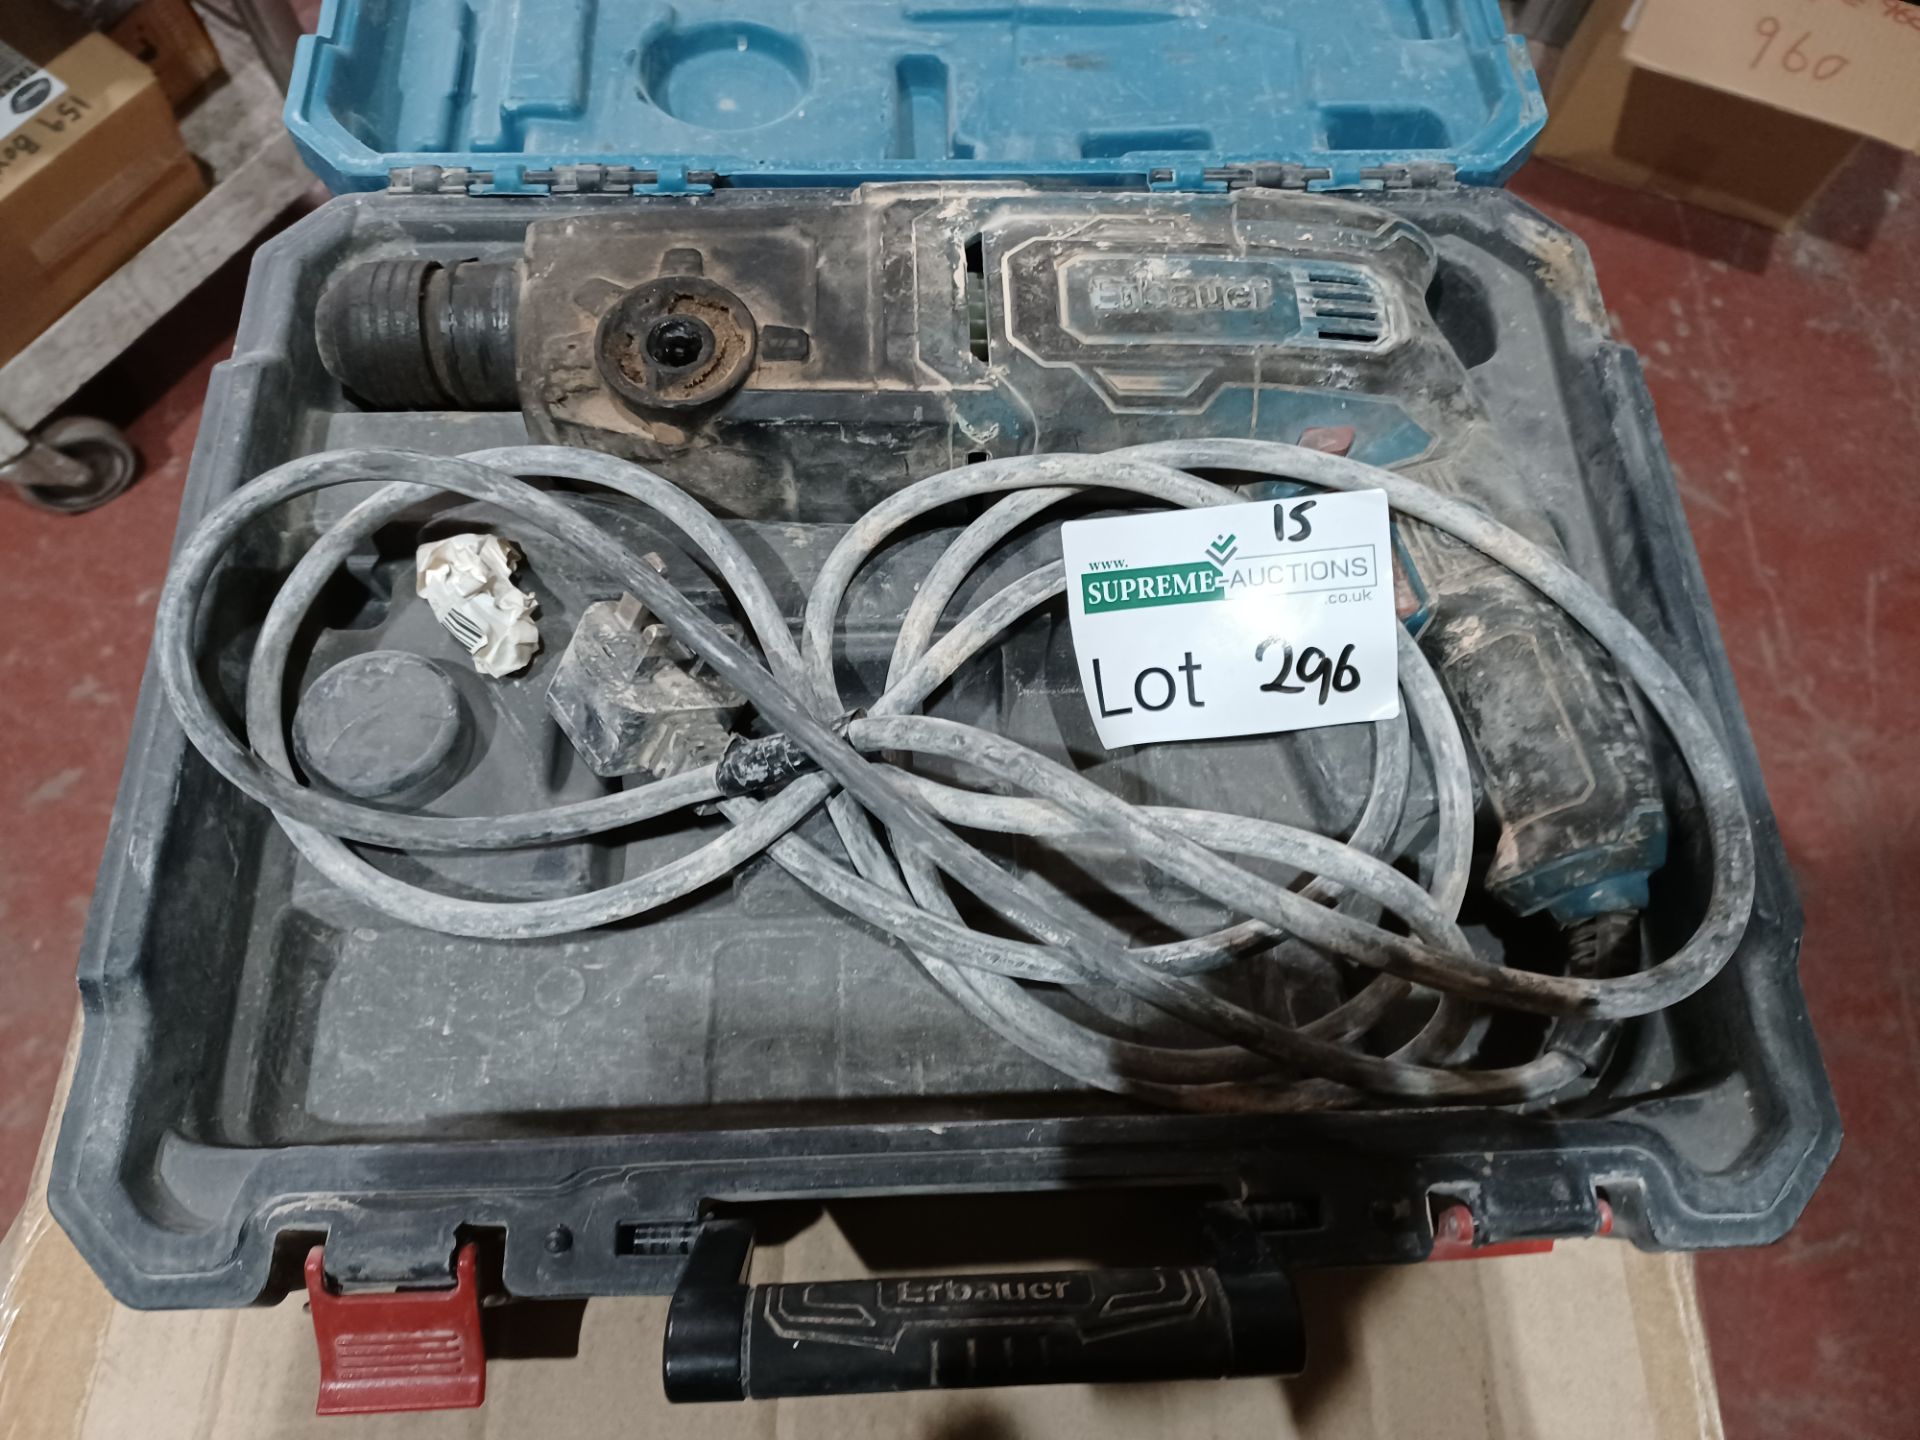 ERBAUER ERH750 3.4KG ELECTRIC SDS PLUS DRILL 220-240V WITH CARRY CASE - BW